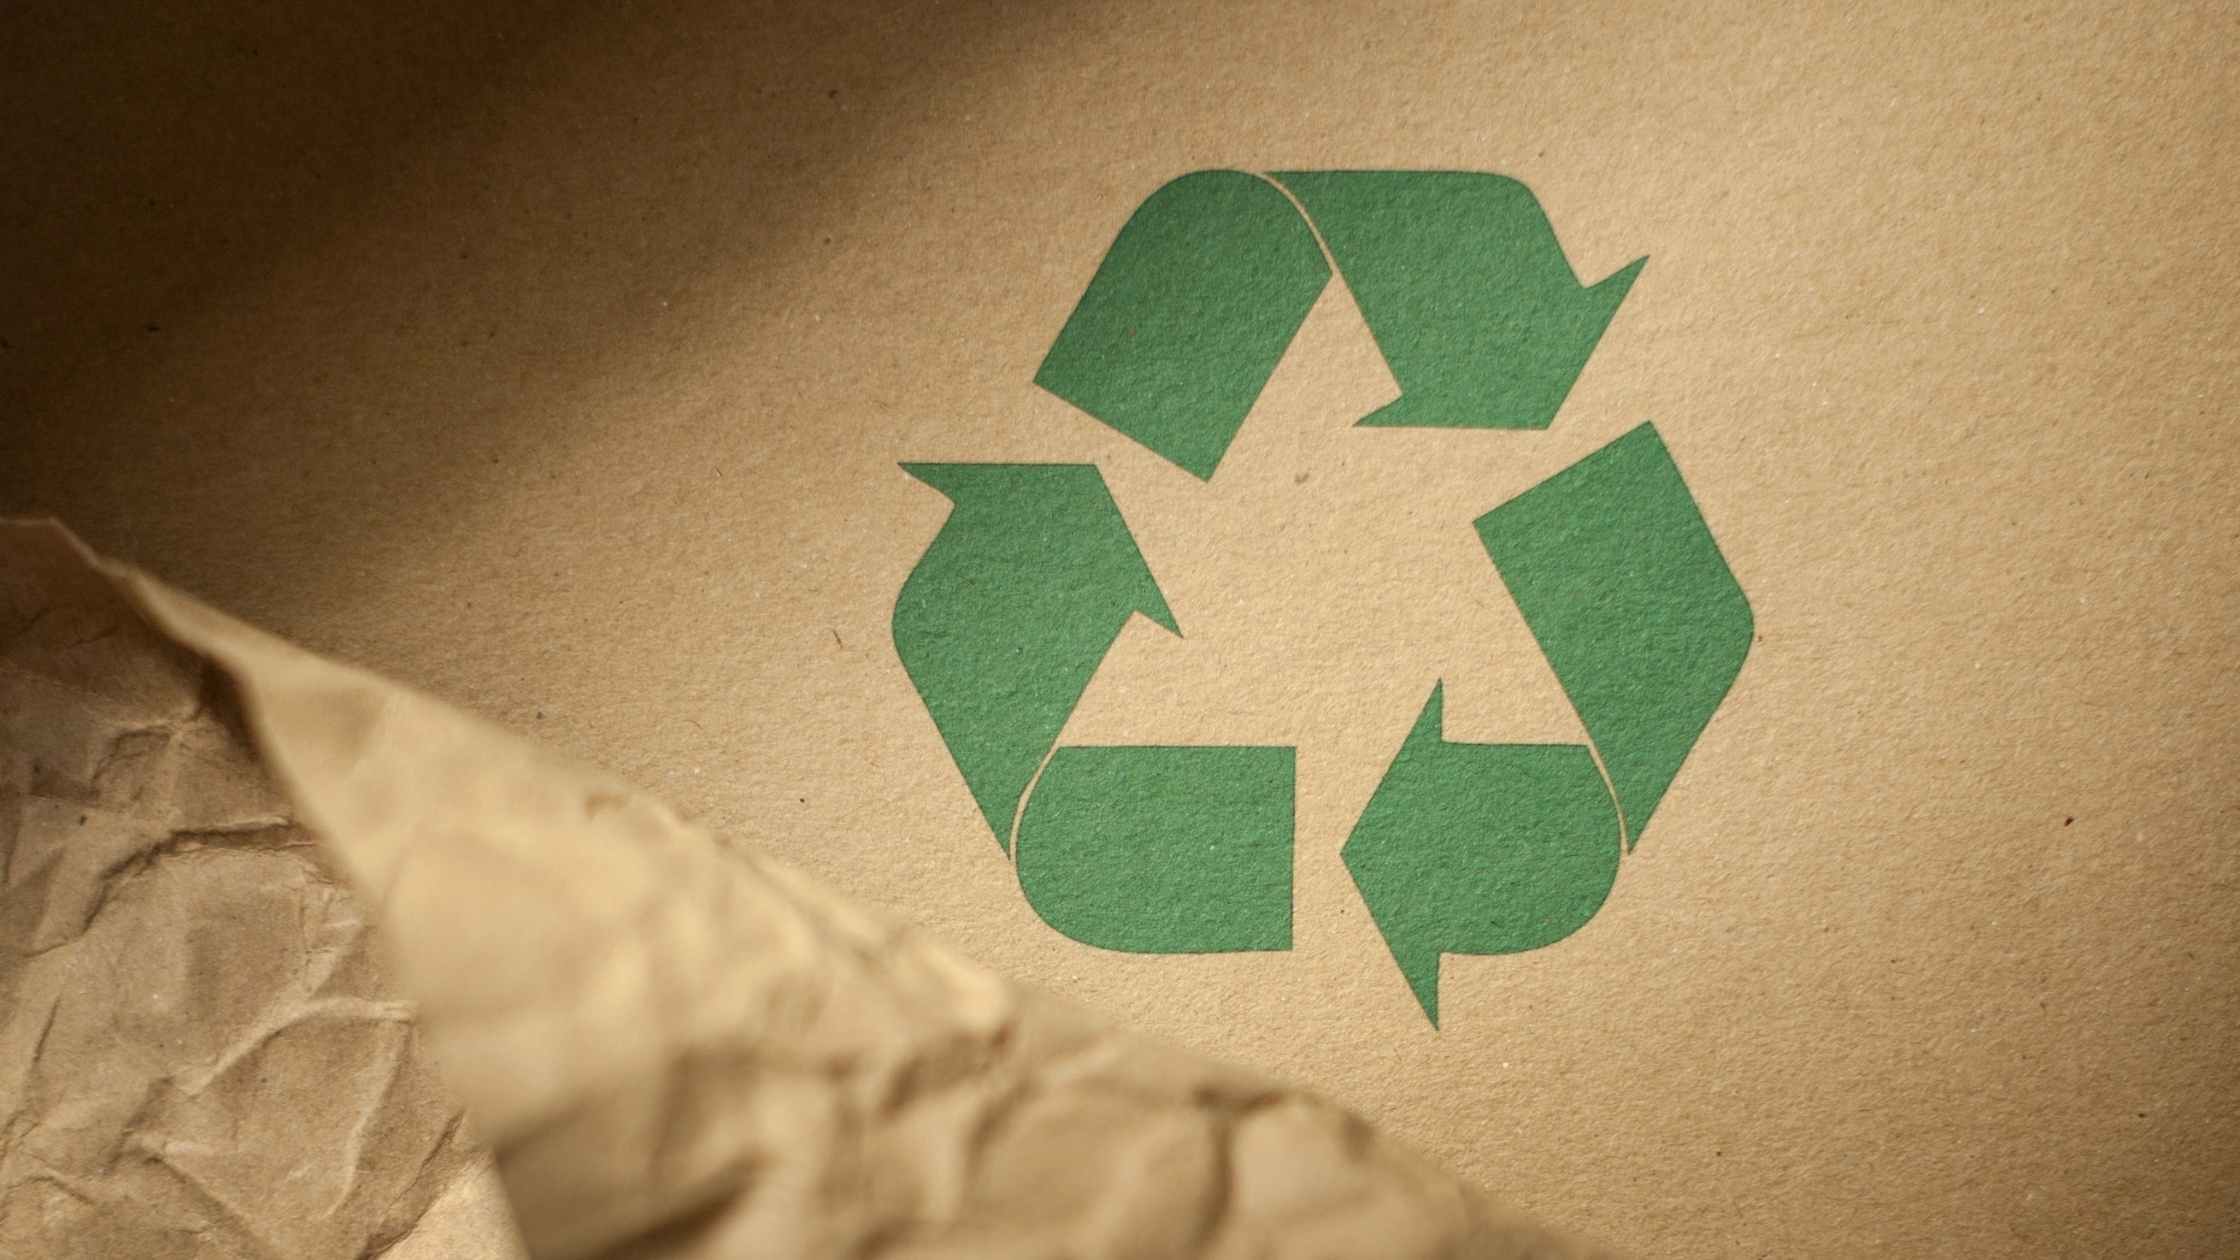 Image of Cardboard with recycle symbol - recycled toilet paper